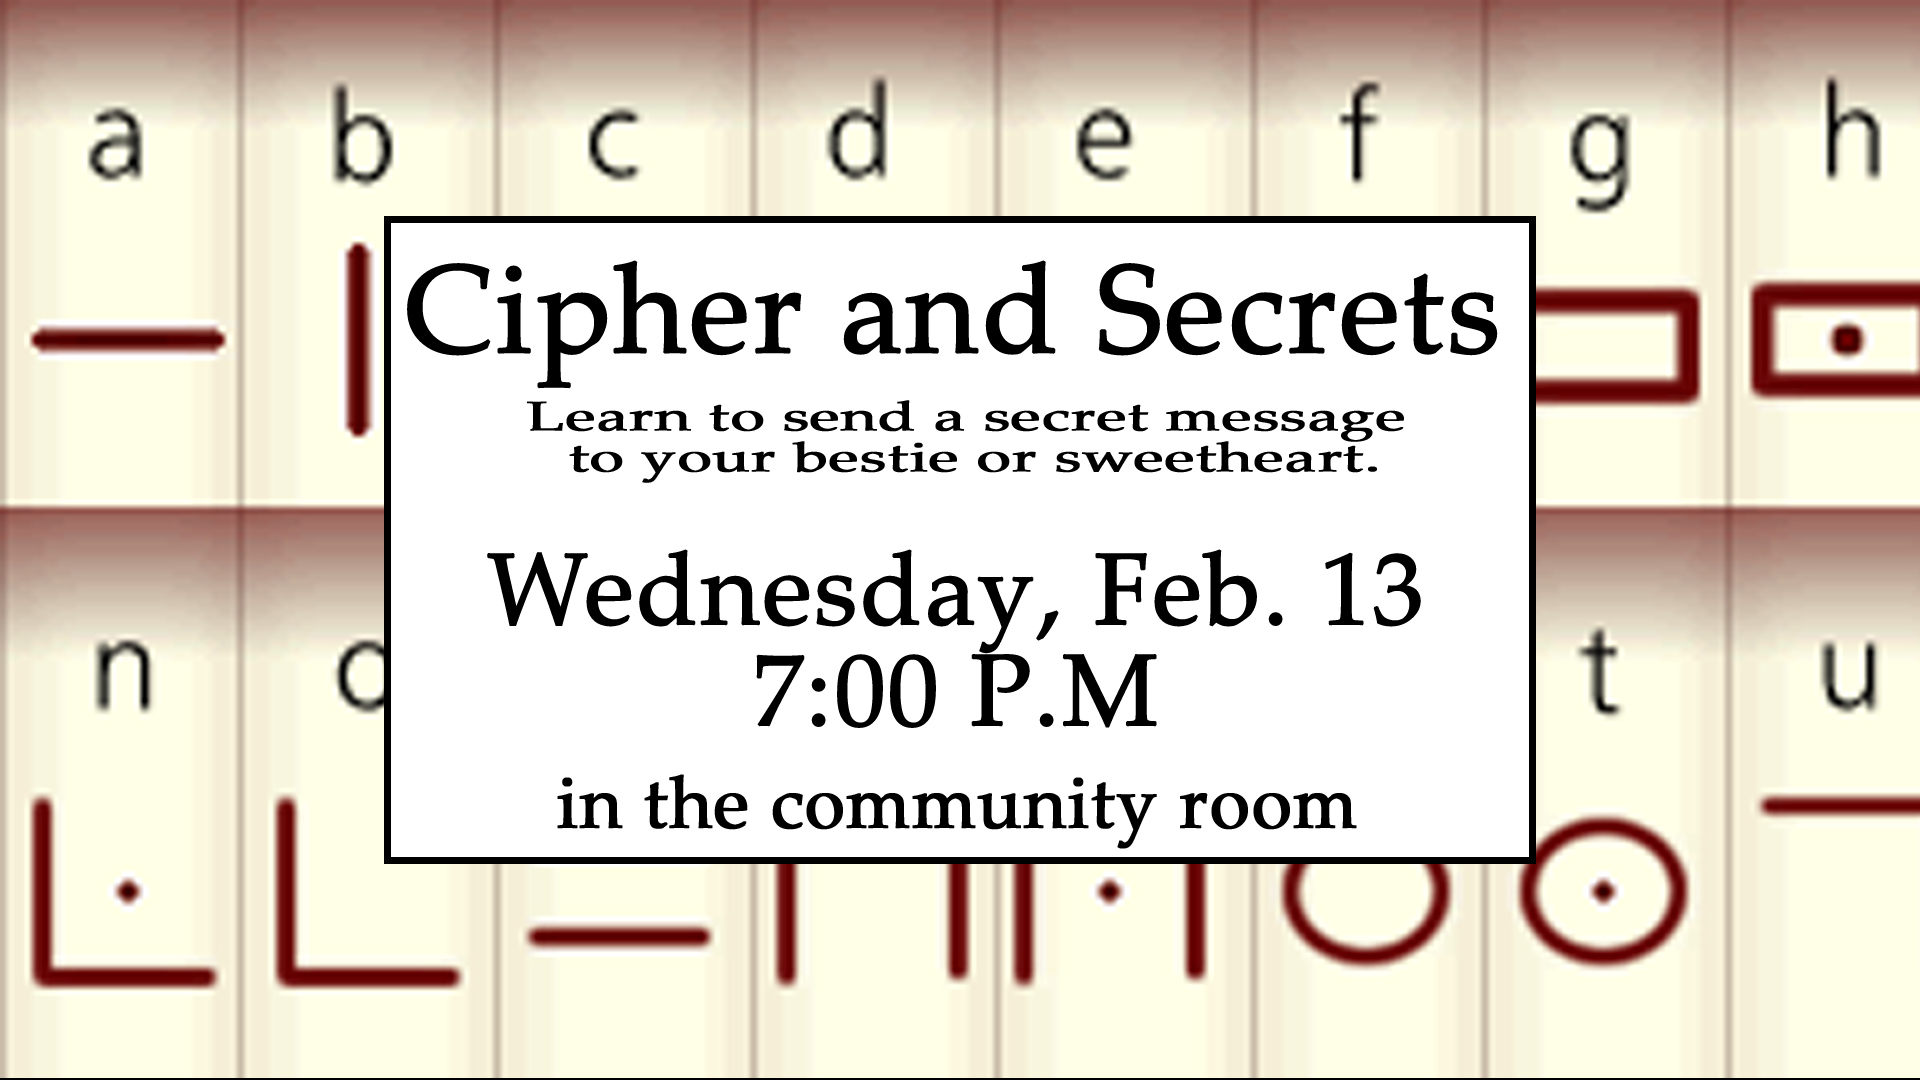 Ciphers and Secrets